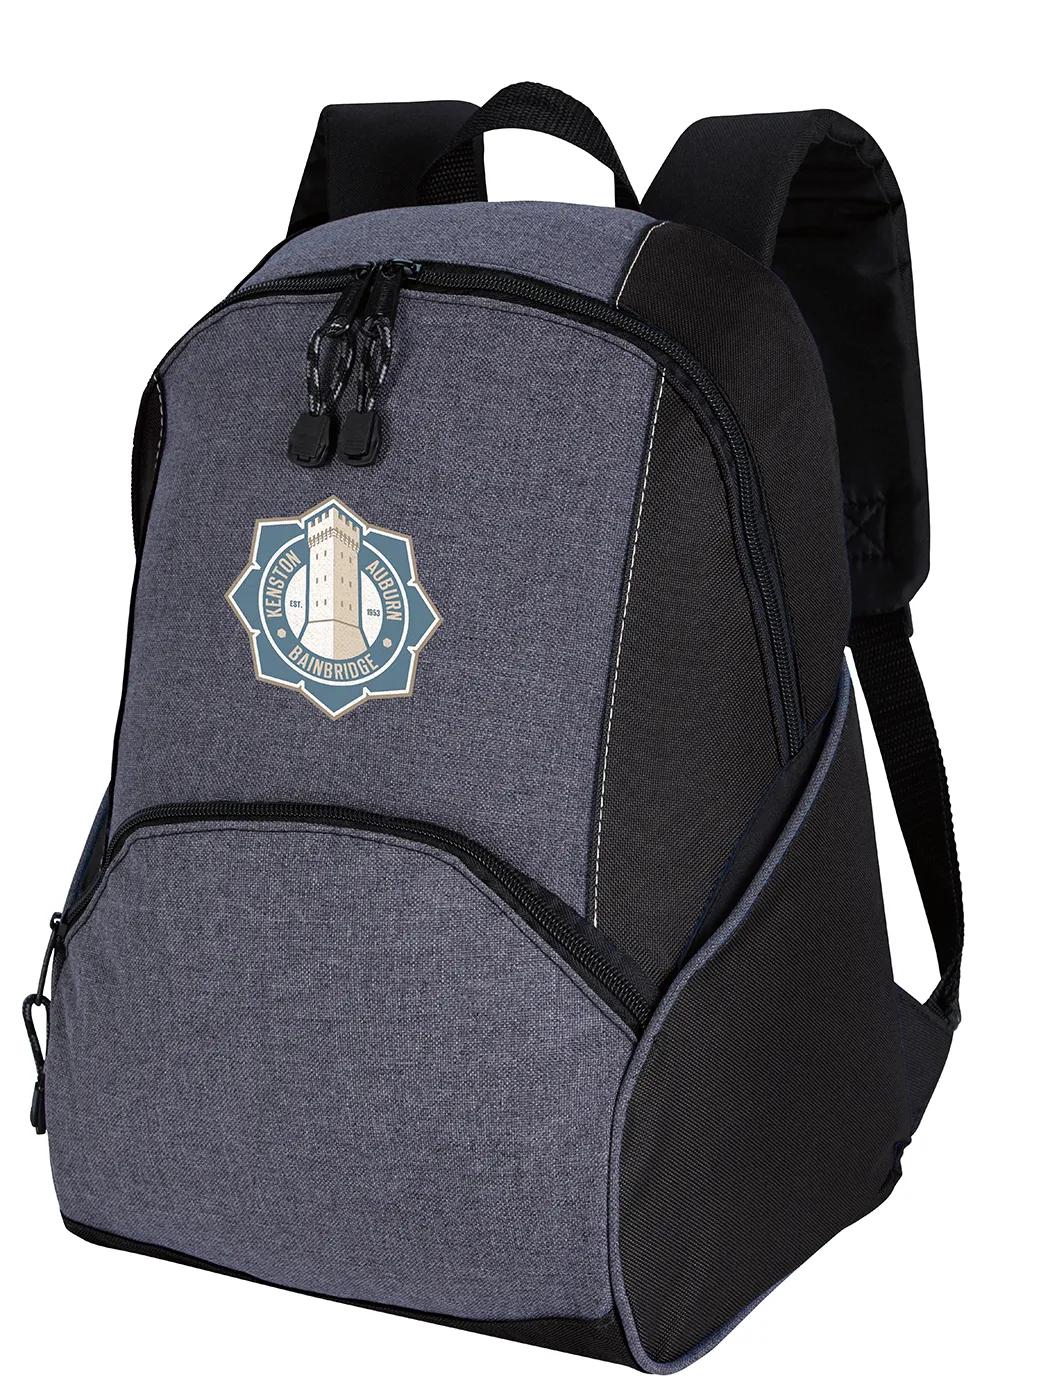 Two-Tone On the Move Backpack 12 of 25